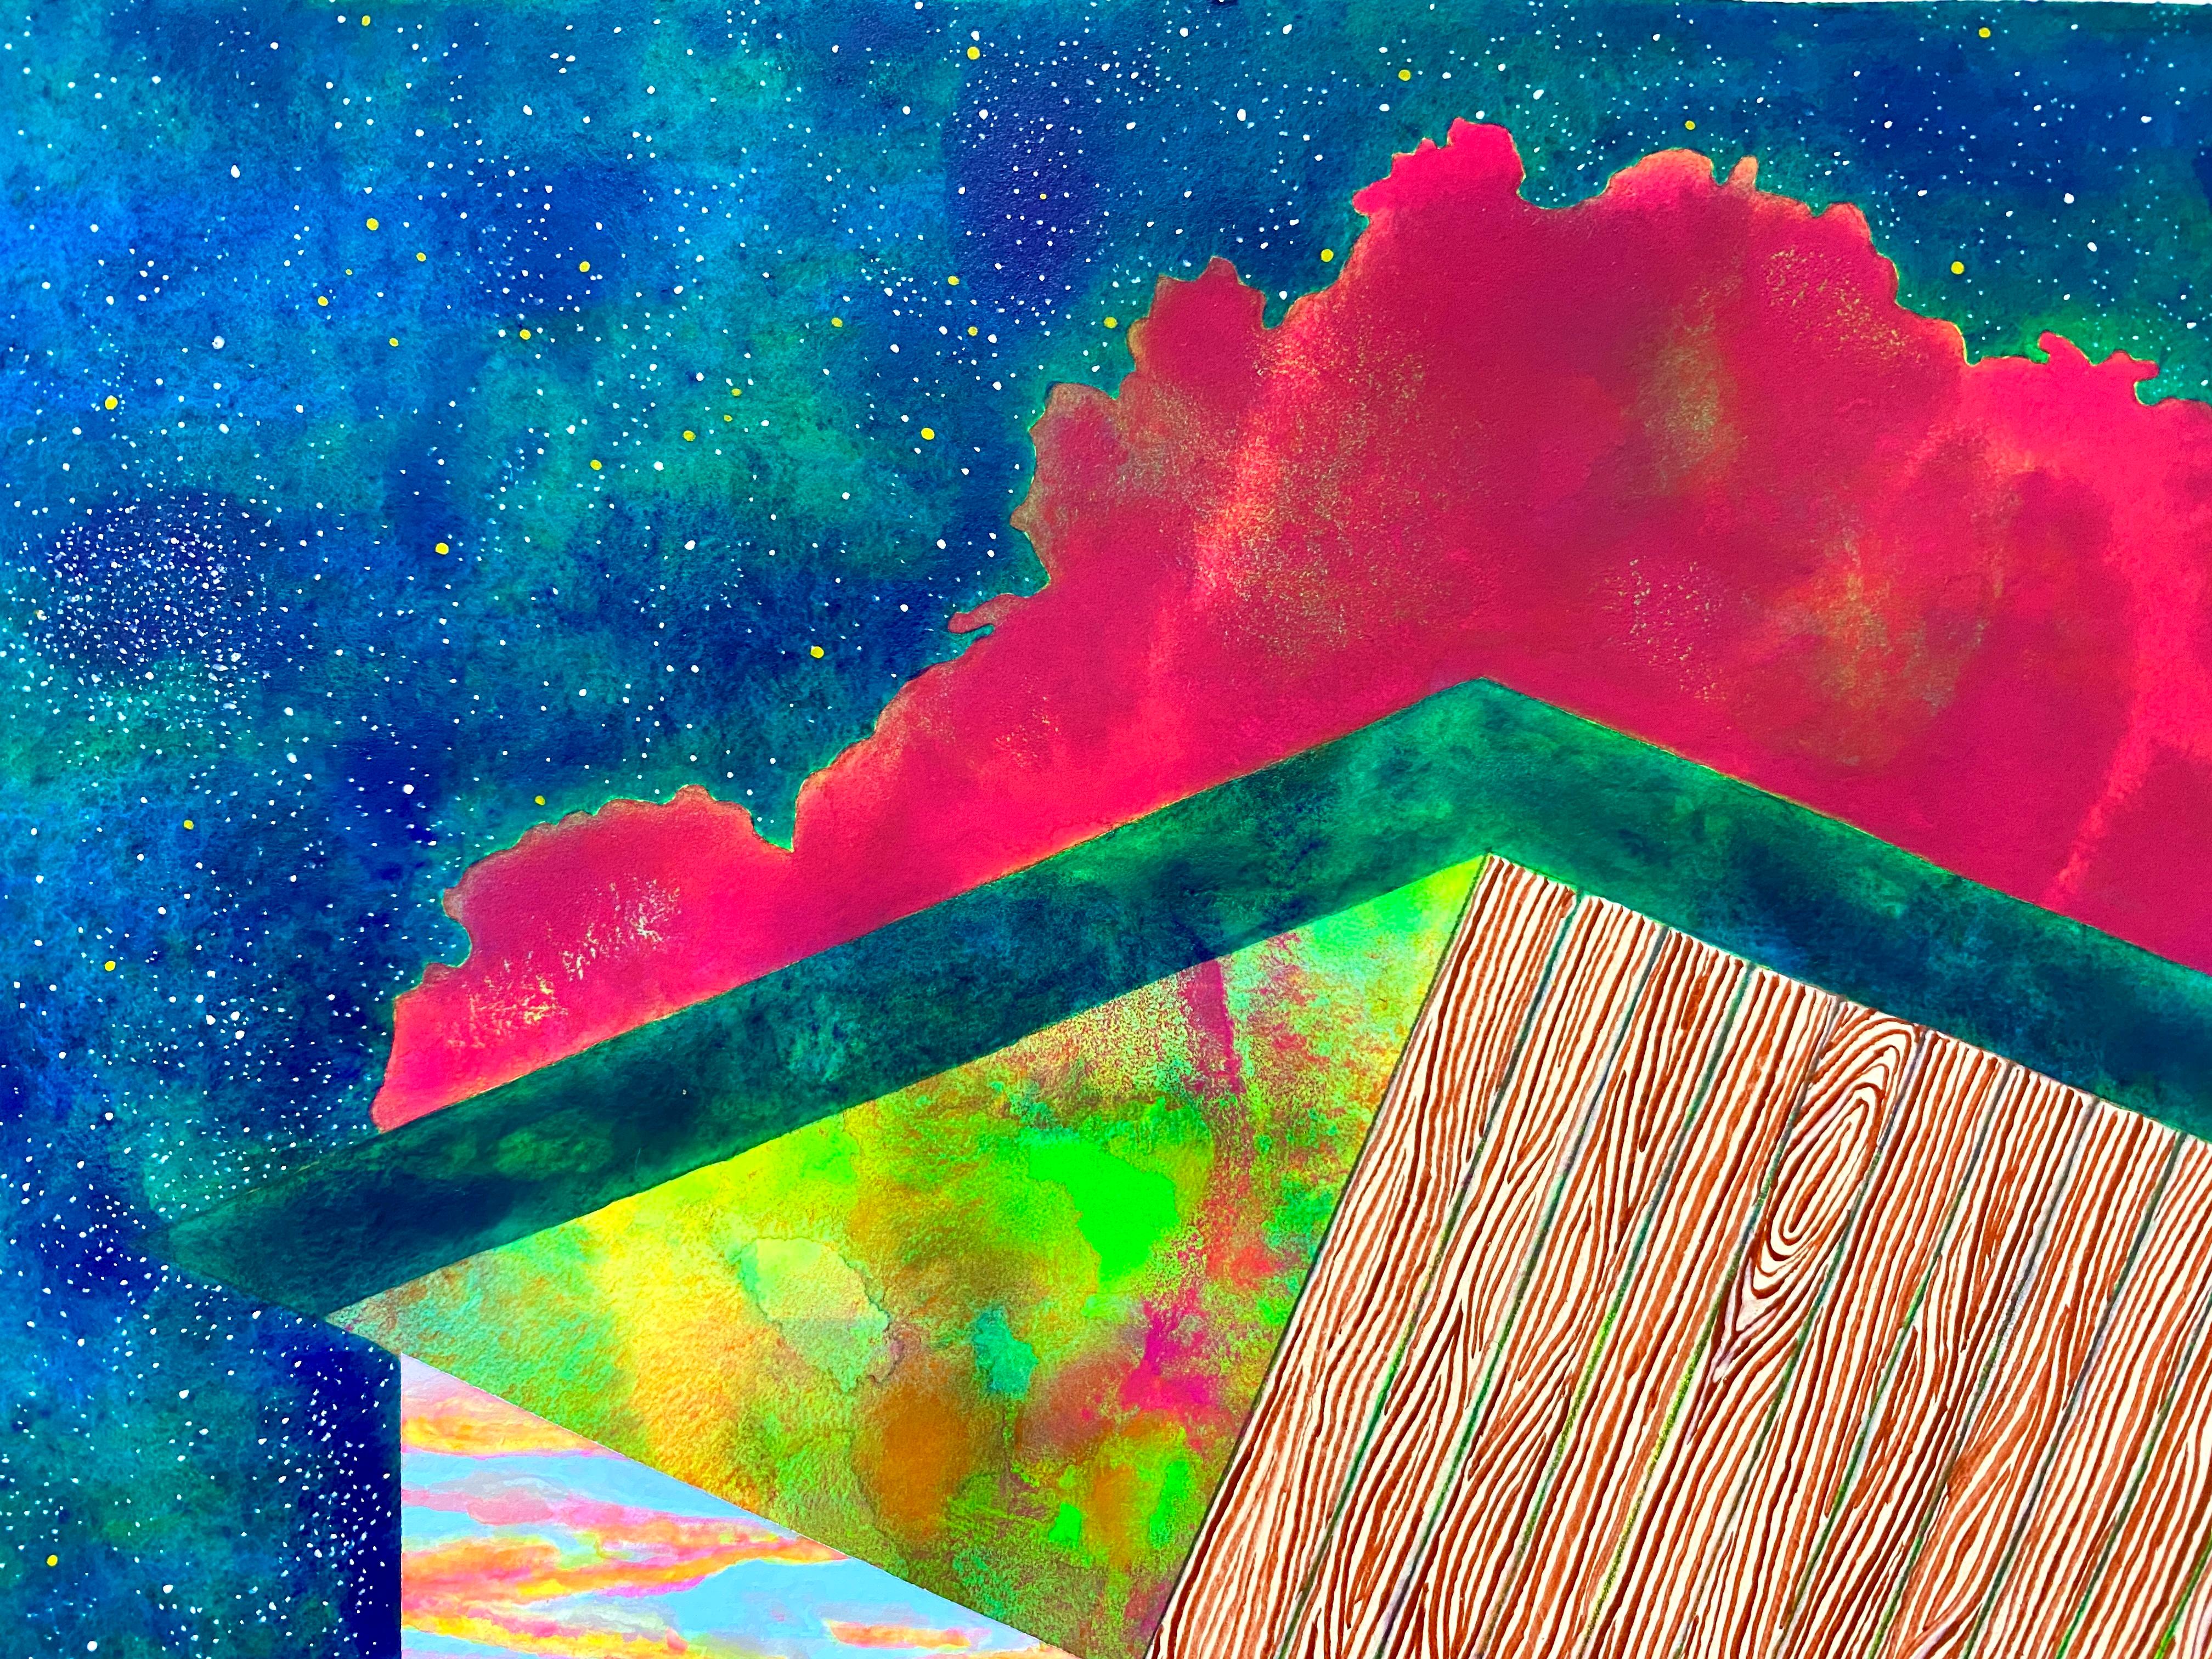 Stargazer, bright surrealistic painting of architecture against sky, neon colors - Art by James Isherwood